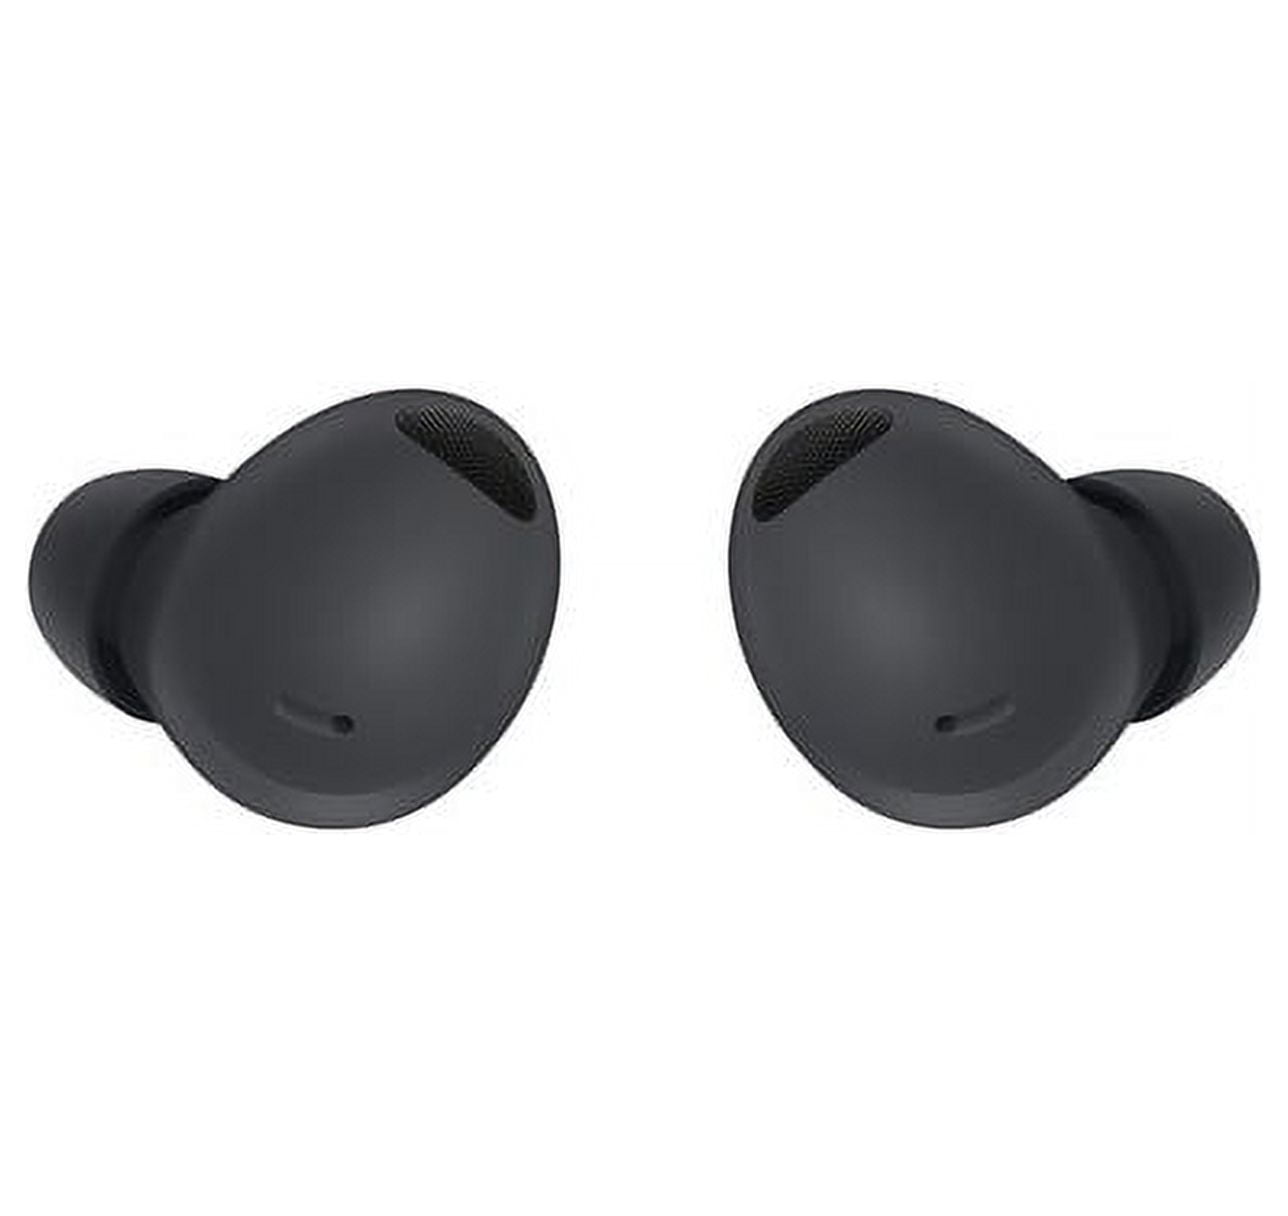 Samsung Galaxy Buds2 Pro for Sale  Buy New, Used, & Certified Refurbished  from